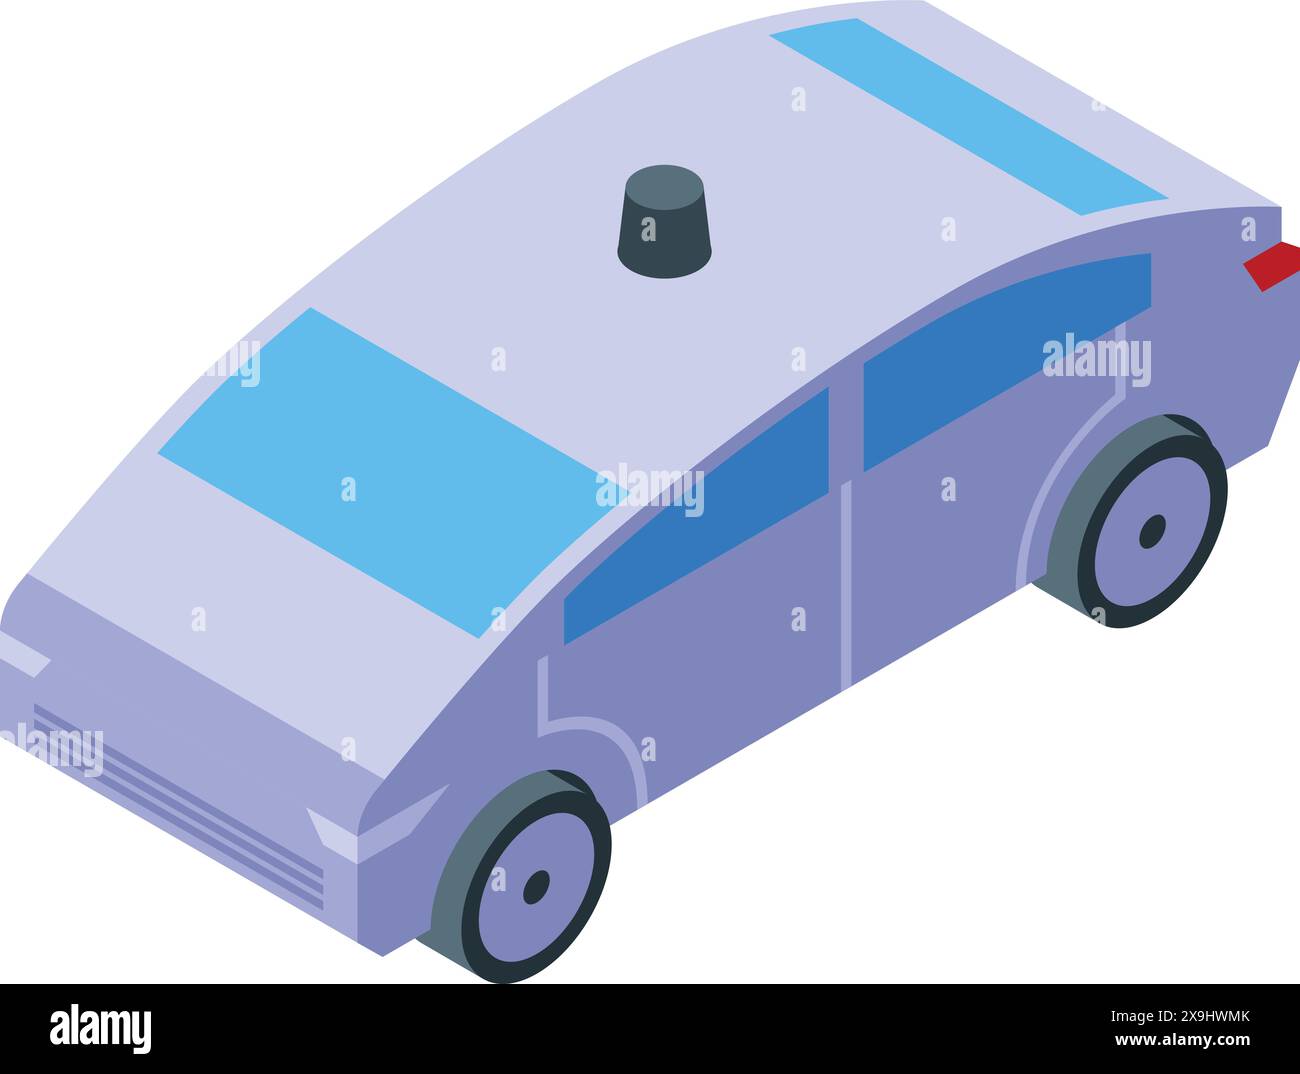 Detailed, stylized isometric police car illustration in vector format with a cartoonstyle design, representing law enforcement and public safety in a modern urban city environment Stock Vector